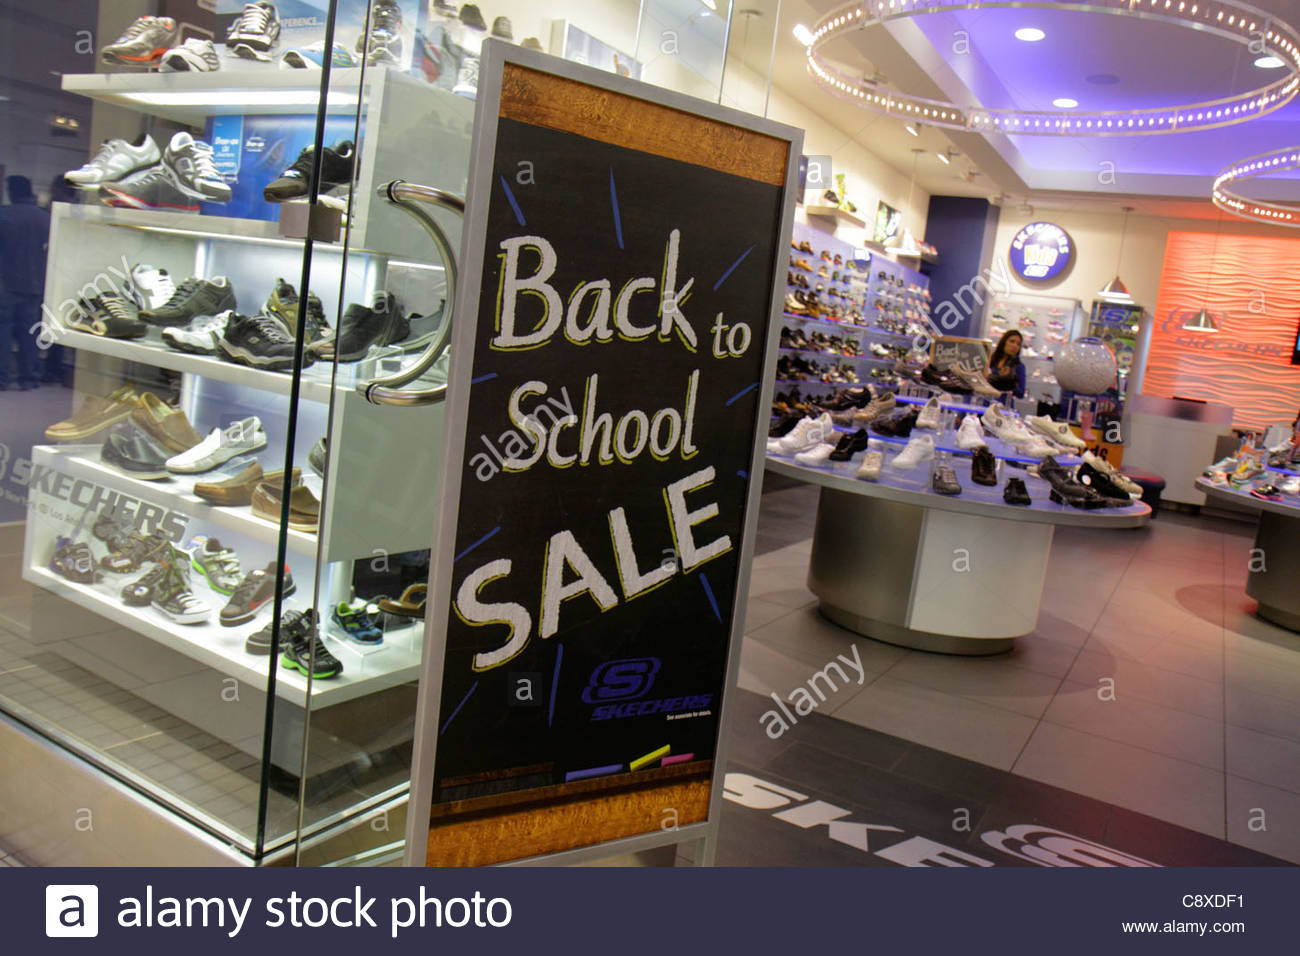 which stores sell skechers shoes